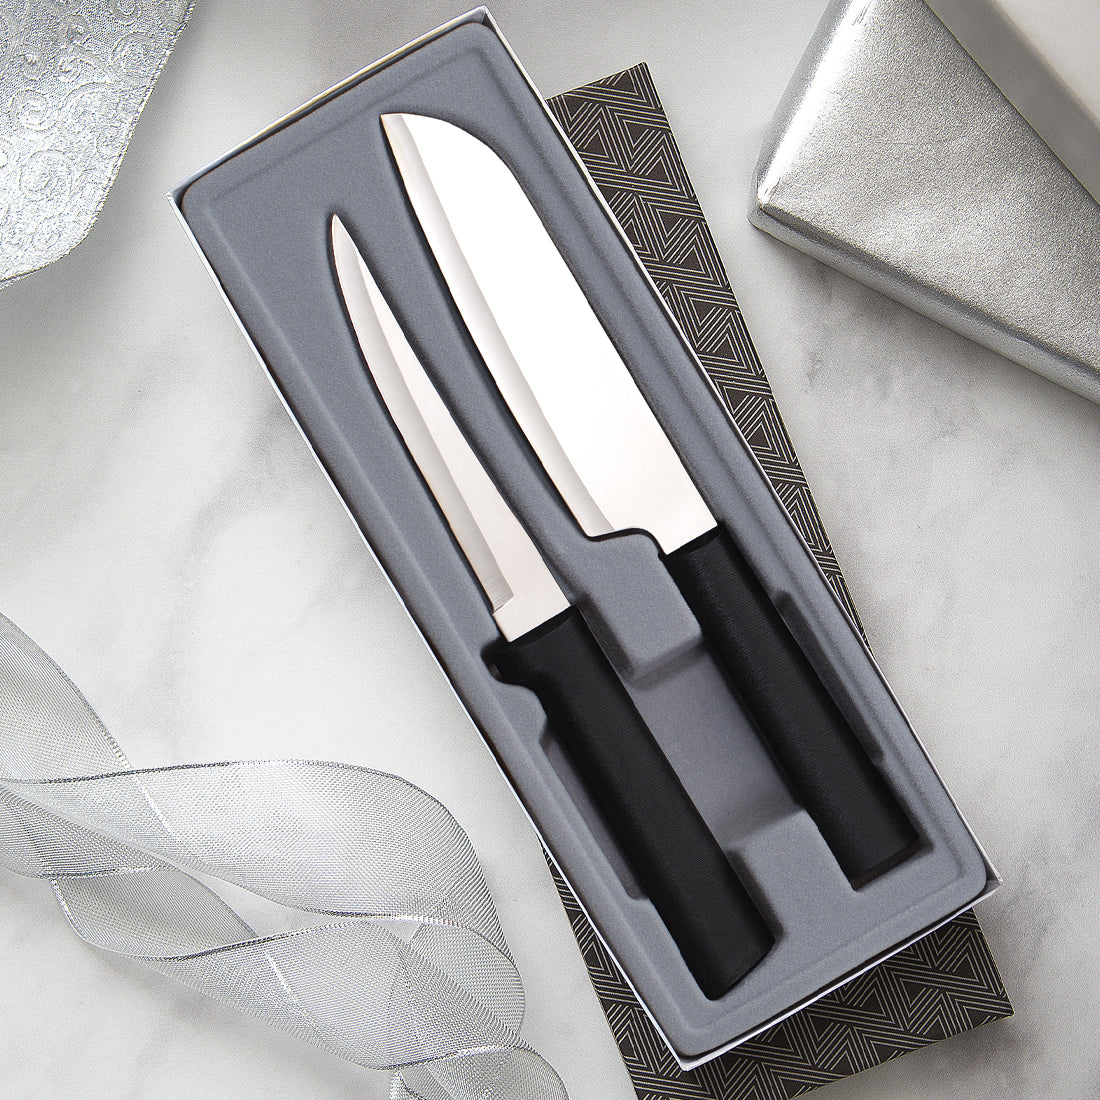  Rada Cutlery Knife 7 Stainless Steel Kitchen Knives Starter  Gift Set with Brushed Aluminum Made in USA, Silver Handle: Boxed Knife  Sets: Home & Kitchen